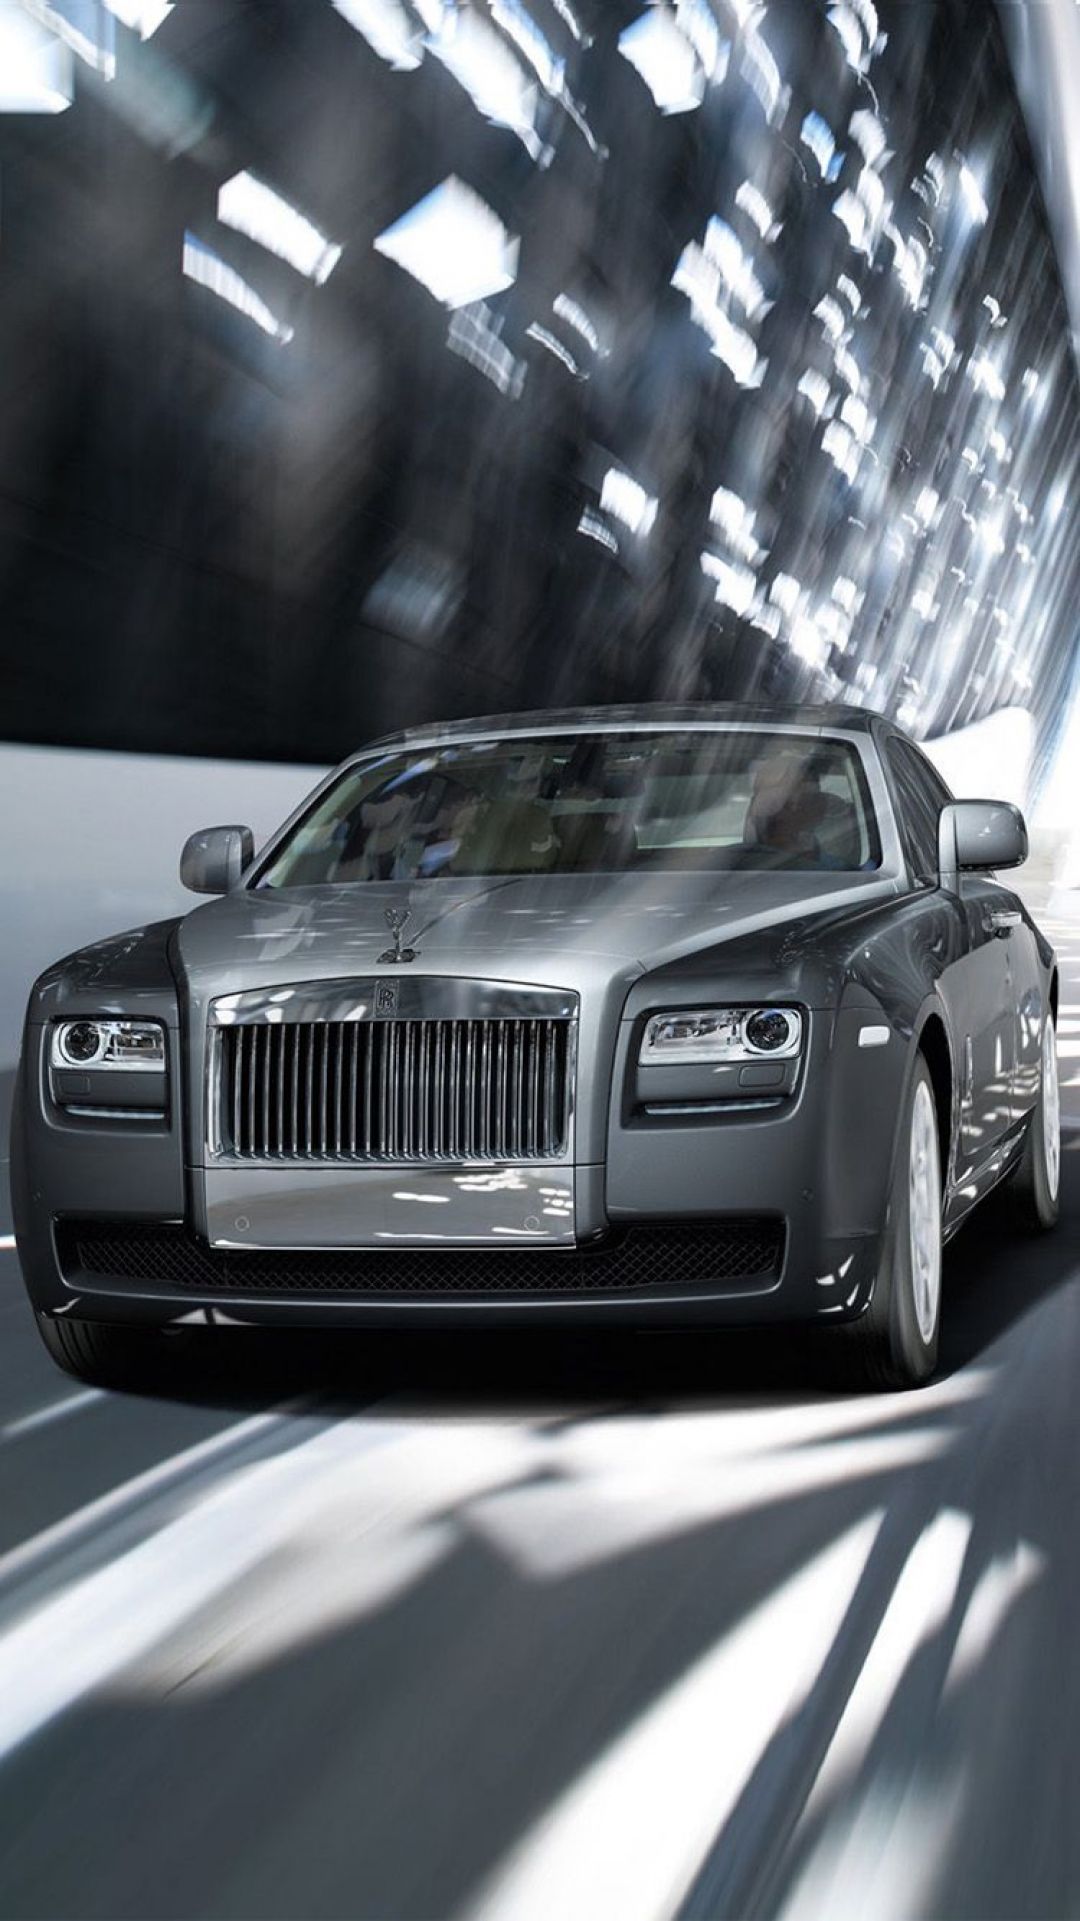 ✓[95+] Rolls Royce Ghost IPhone 6 6 Plus Wallpaper. Rolls Royce - Android /  iPhone HD Wallpaper Background Download (png / jpg) (2023)